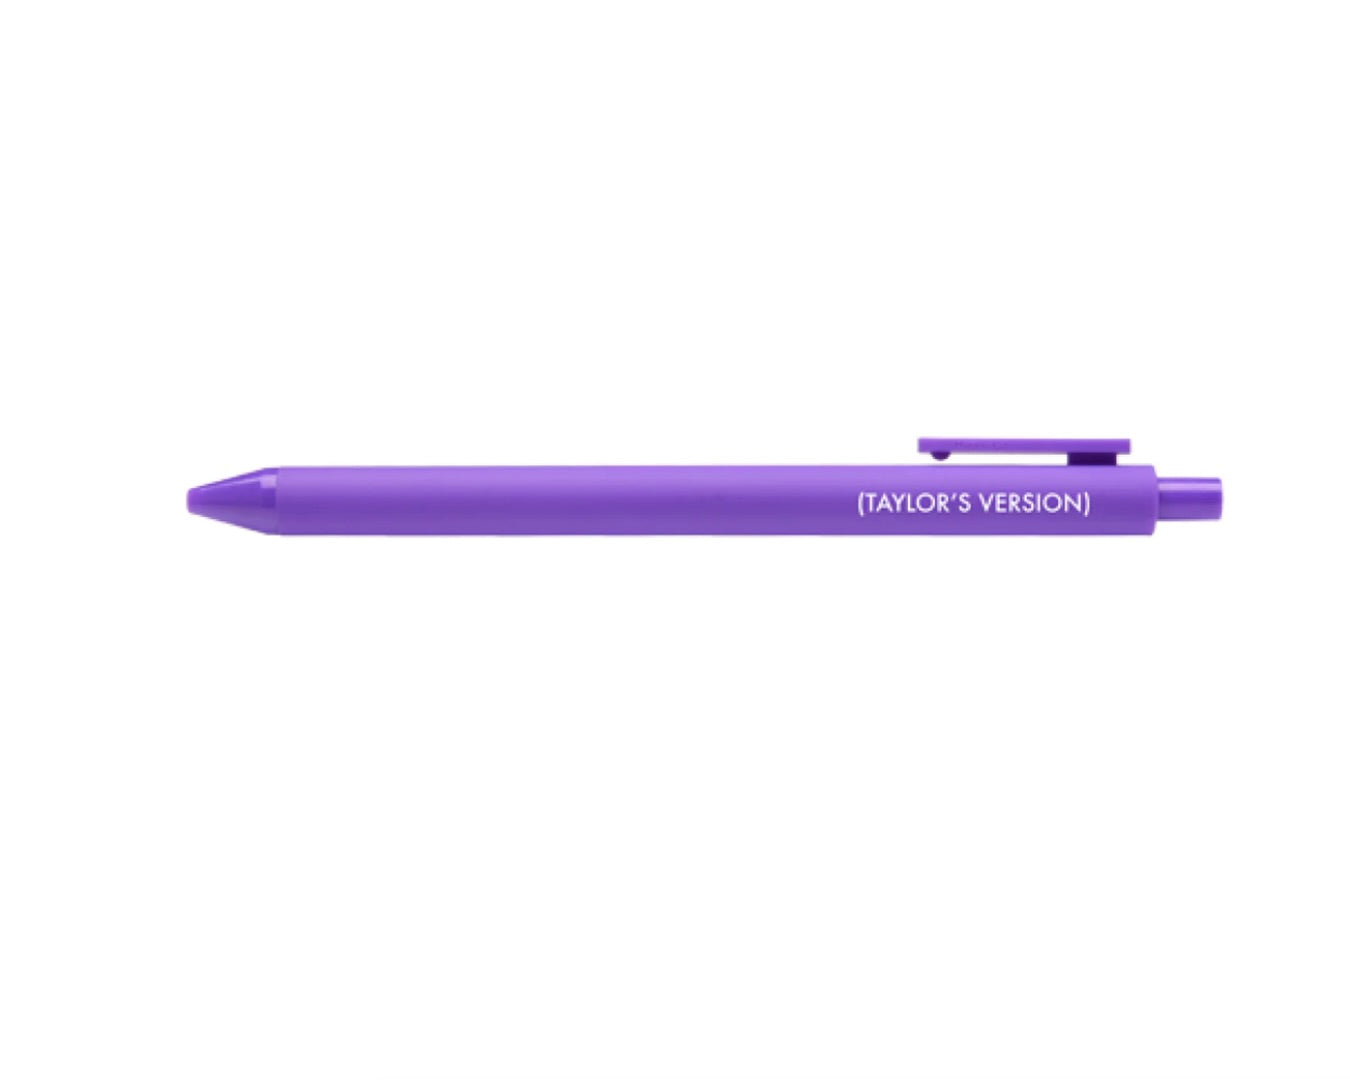 Image of Taylor Swift (Taylor's Version) Pen on a white background